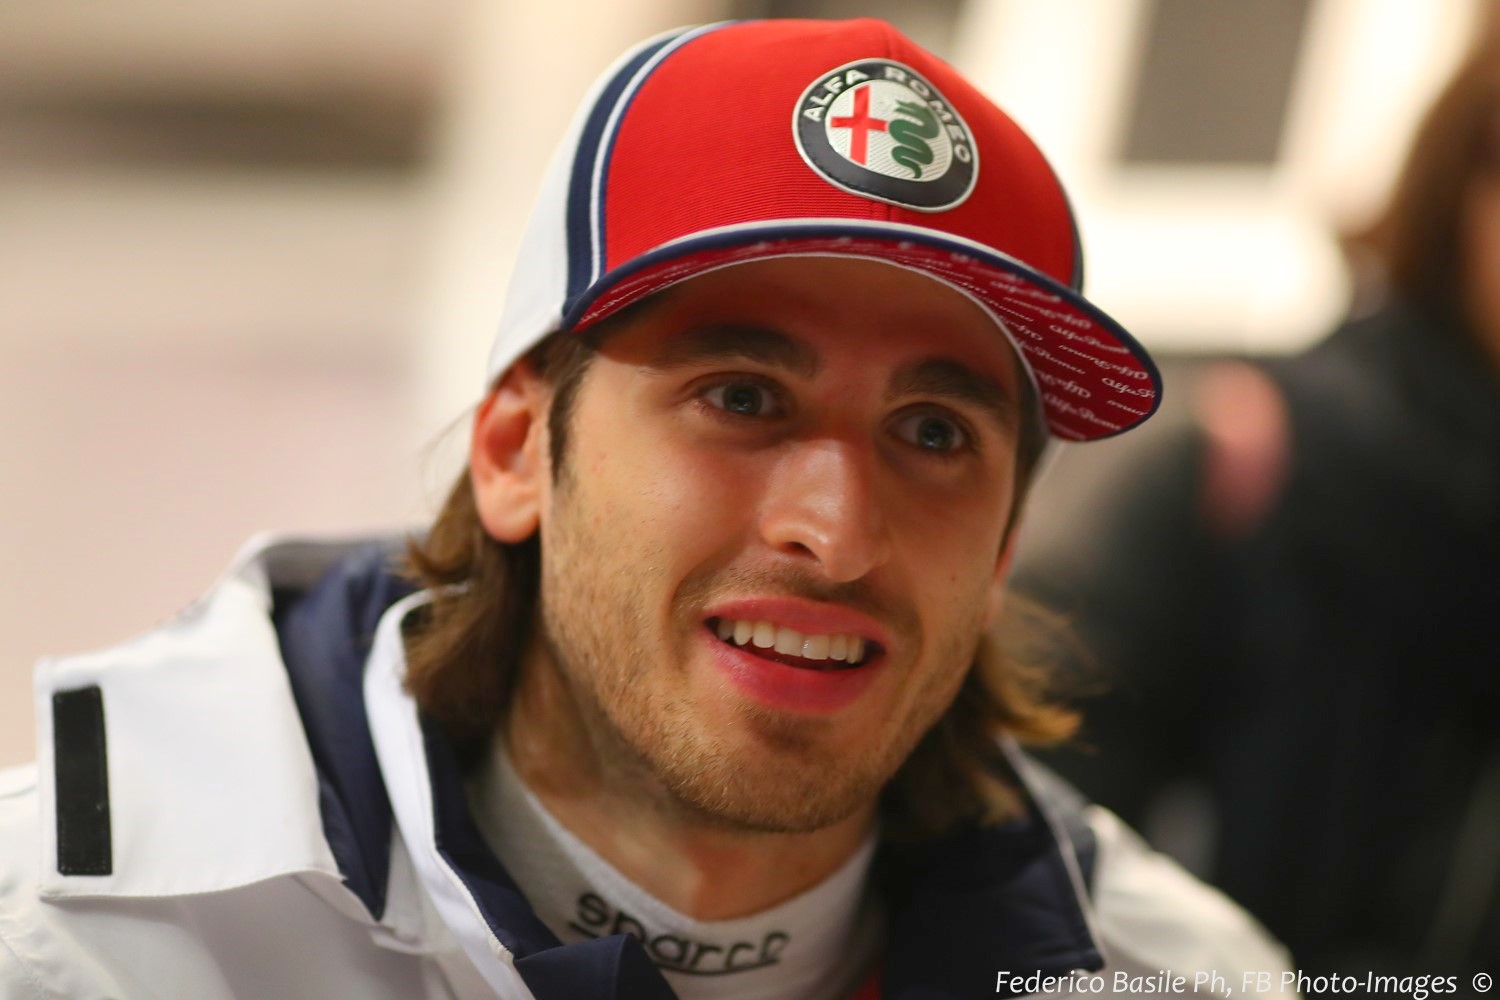 If Giovinazzi's check comes thru, then Hulkenberg is out